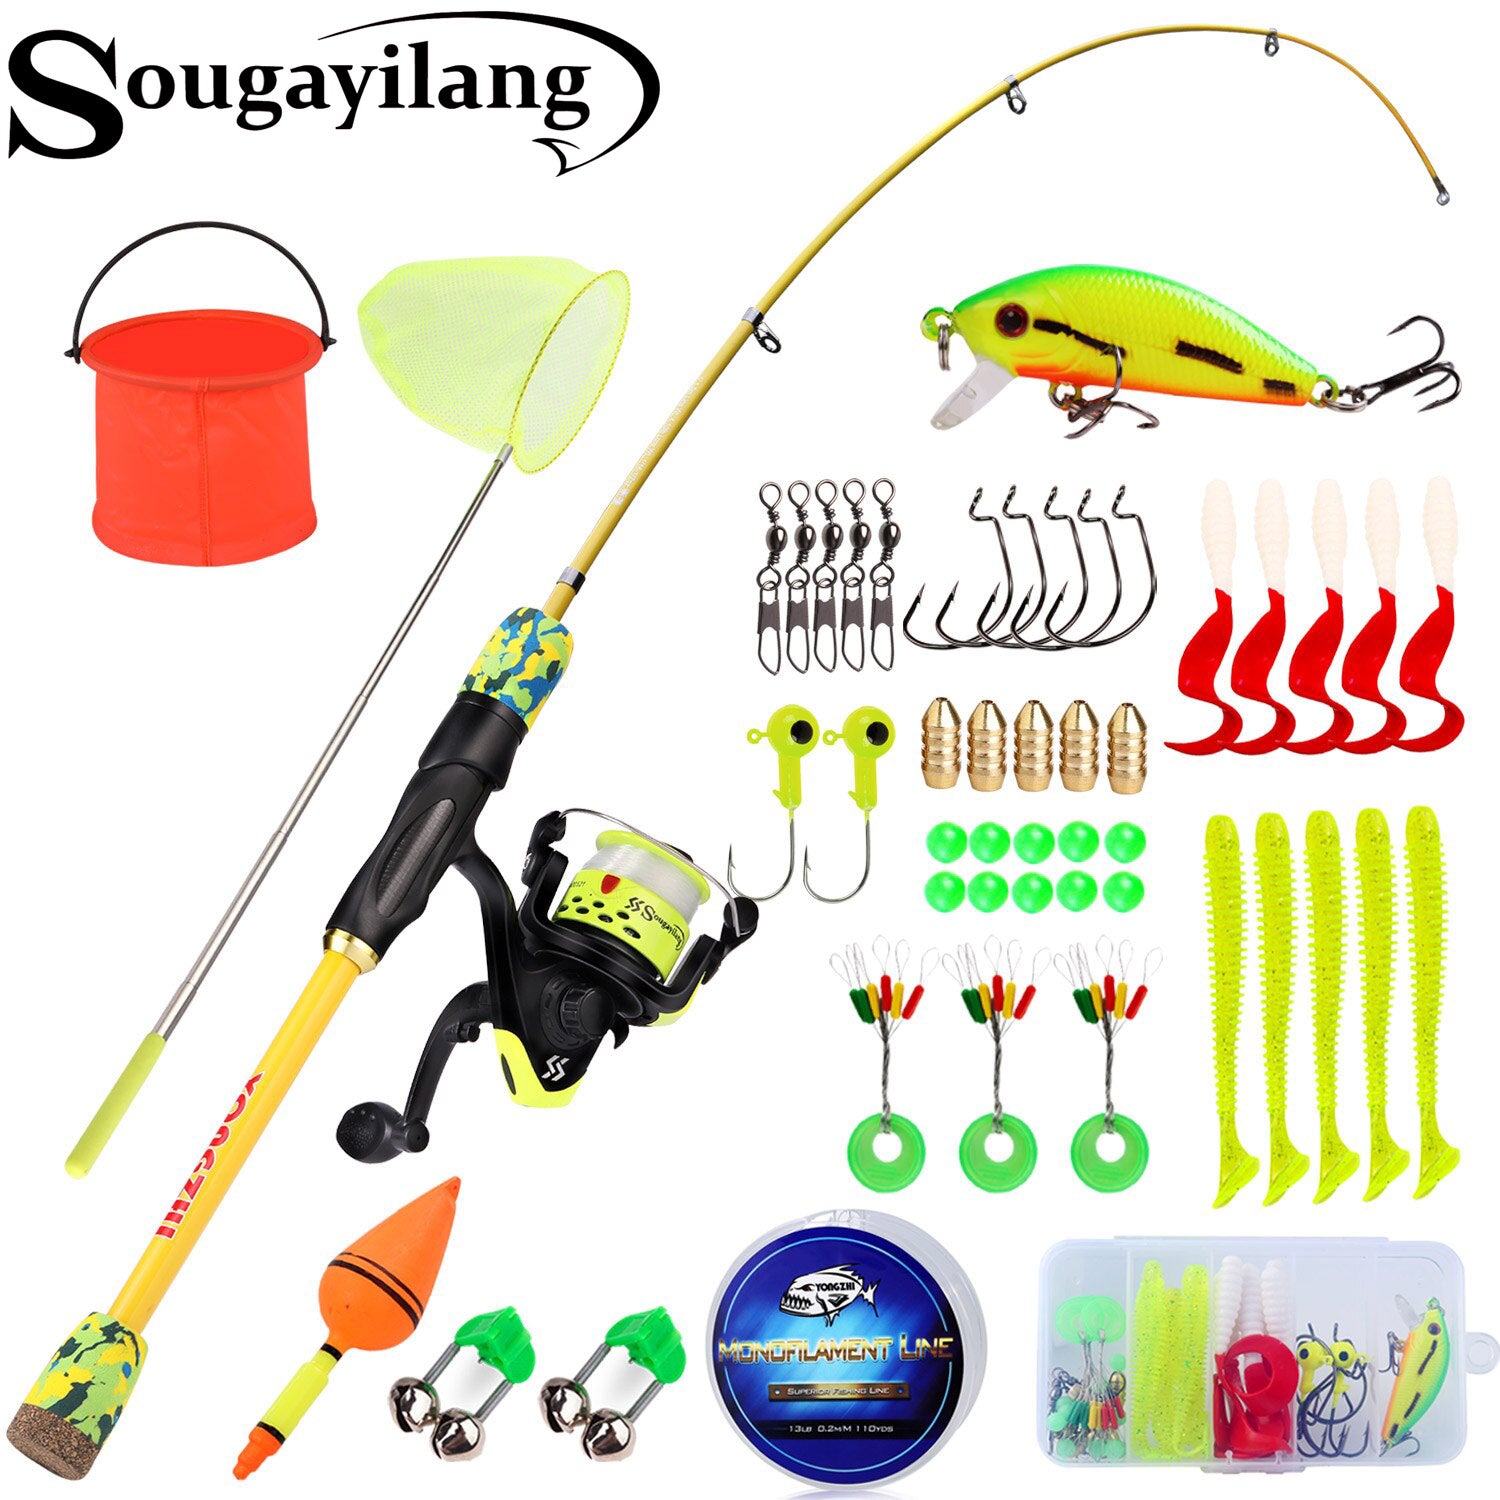 Sougayilang Fishing Rod and Reel Combo Spinning Fishing Rod and Spinning  Reel Fishing Line Lure Hook Full Set Gifts for Children